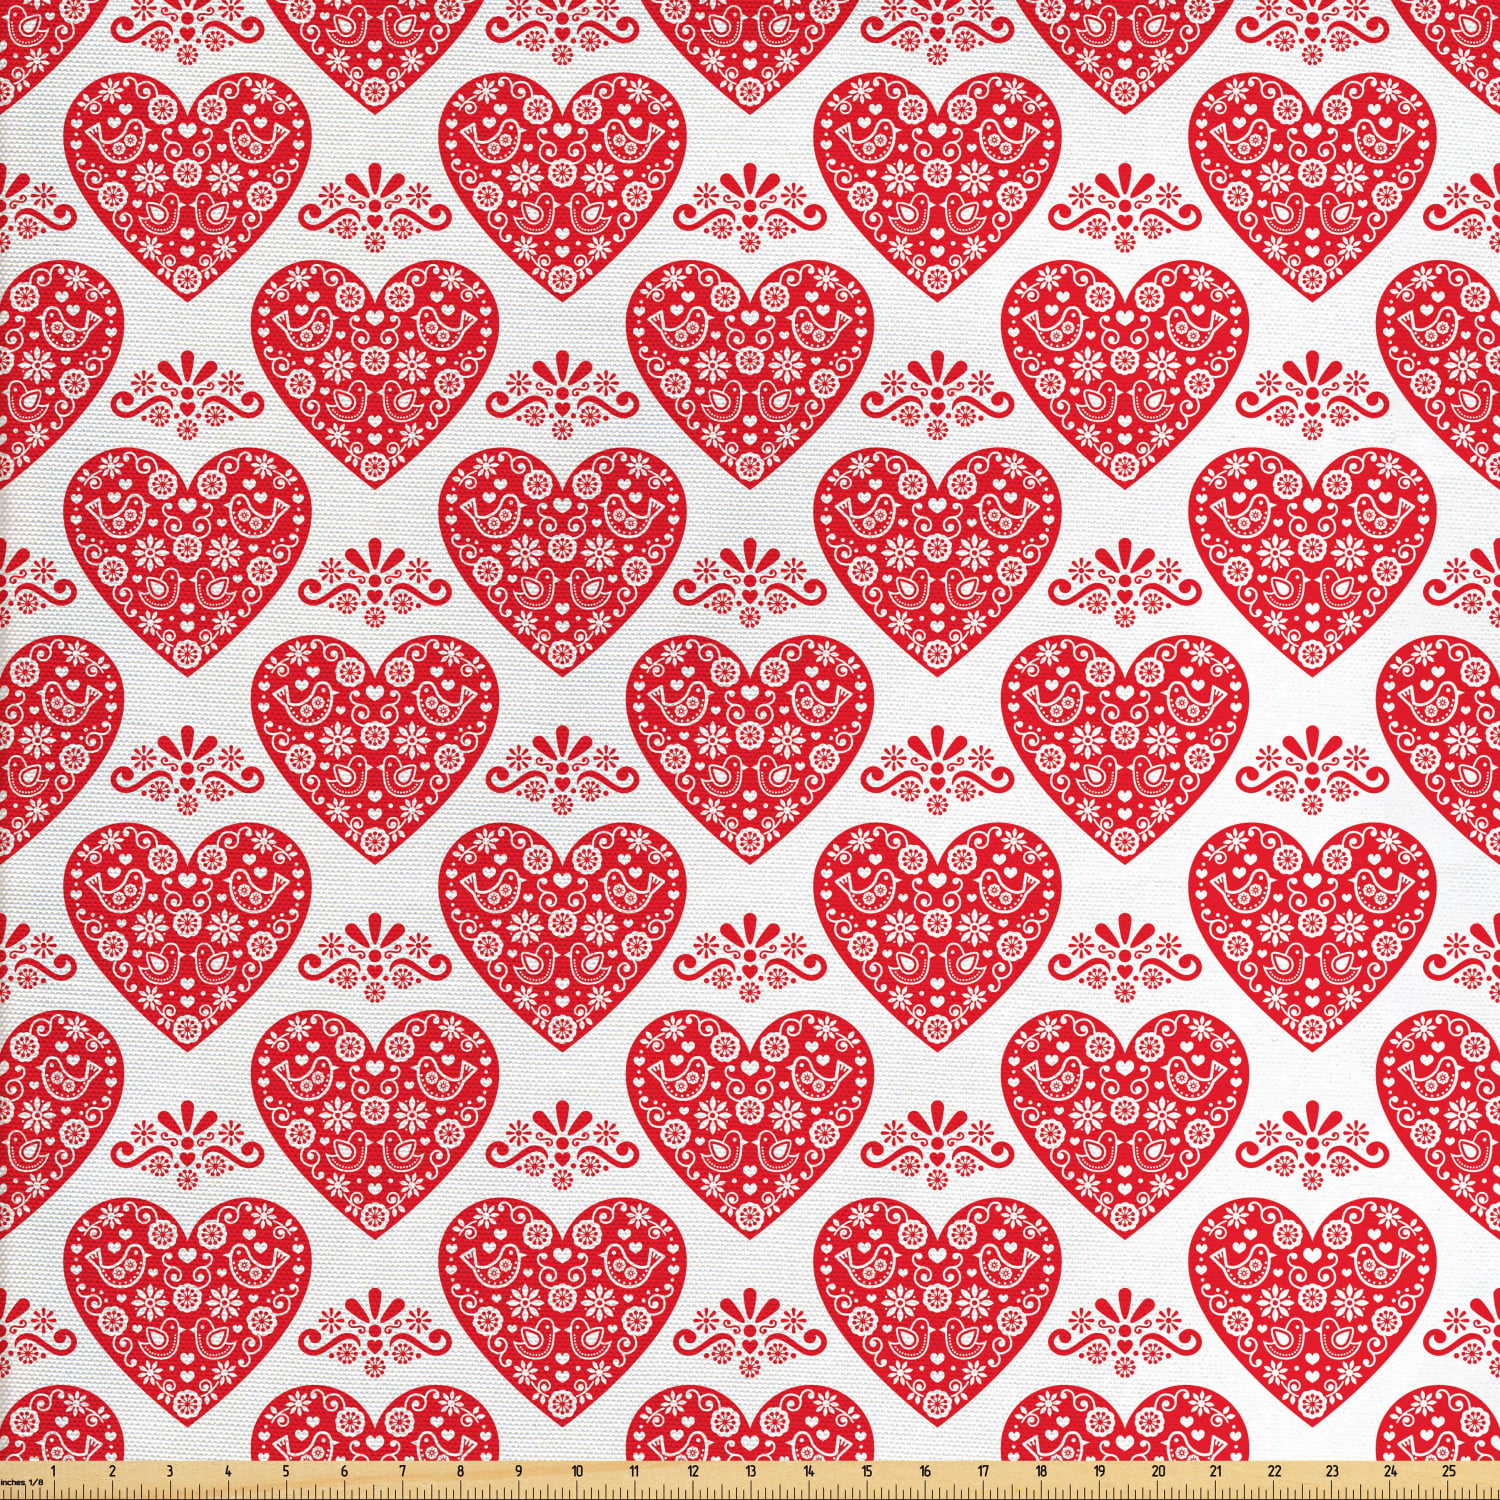 Red Scandi Hearts Fabric Beige Cotton Canvas Upholstery Fabric 